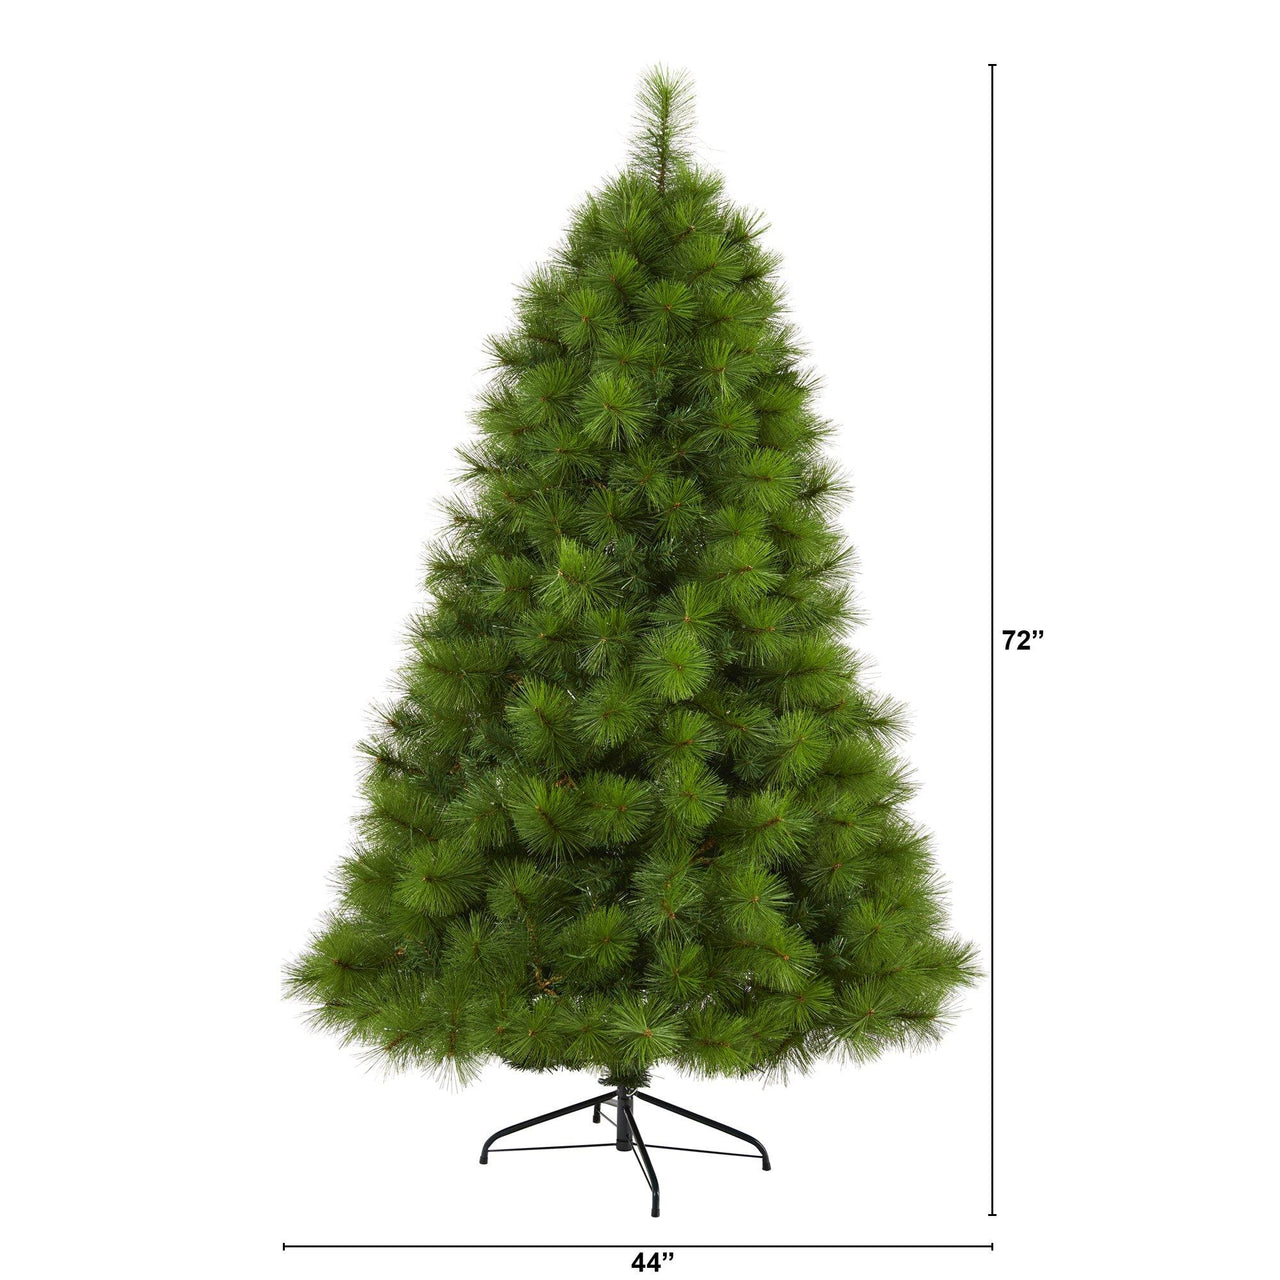 6’ Green Scotch Pine Artificial Christmas Tree with 300 Clear LED Lights - The Fox Decor